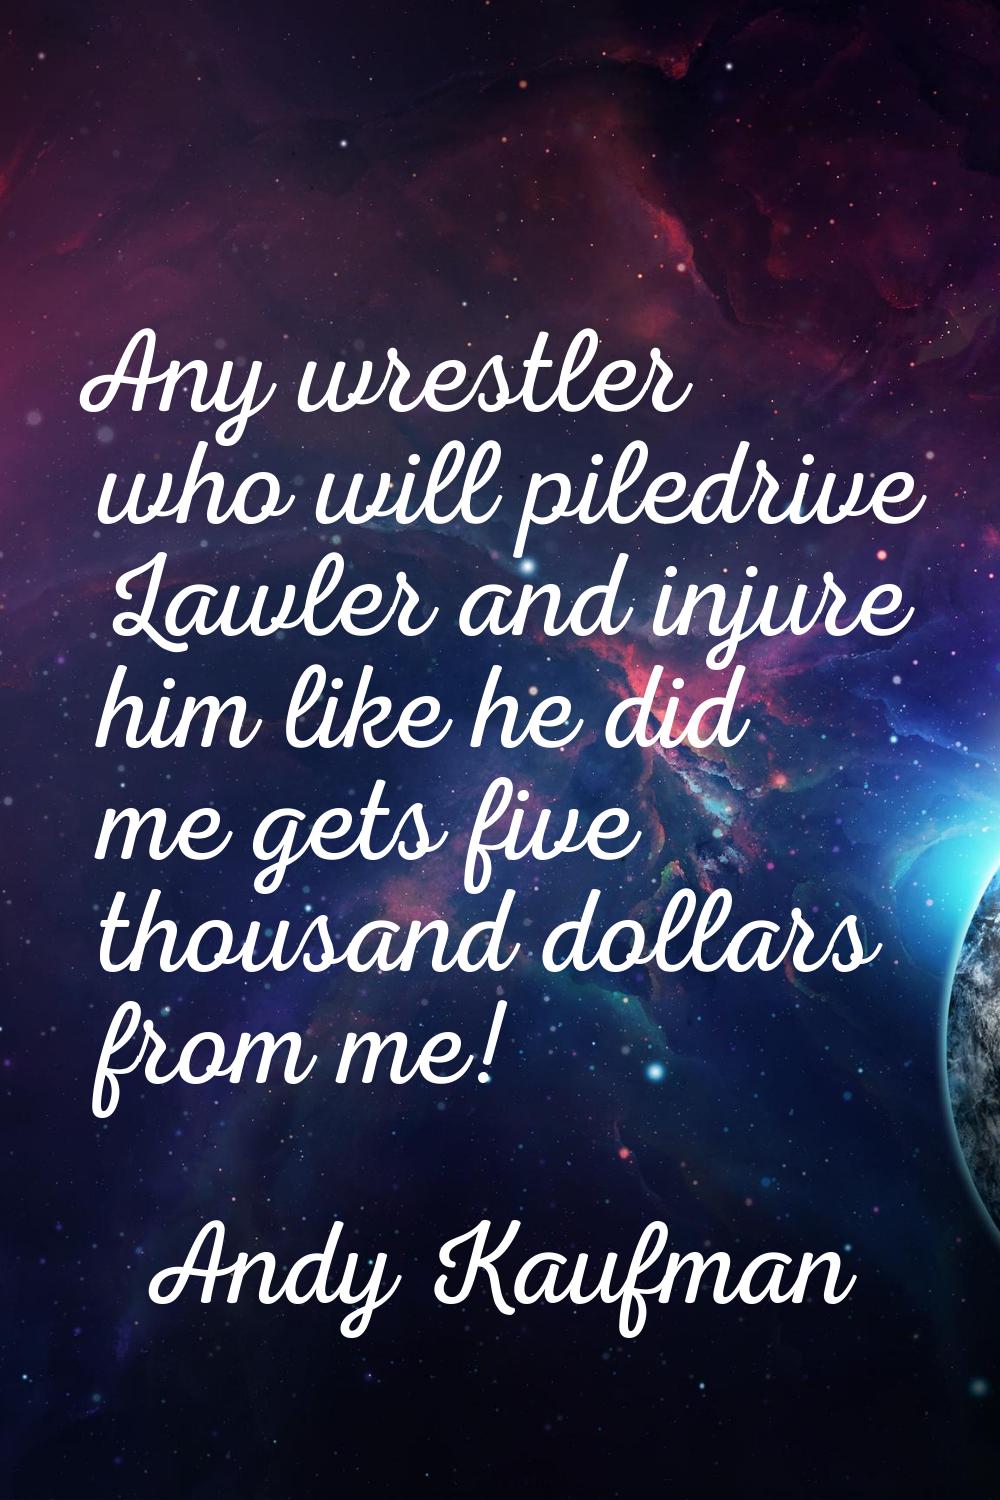 Any wrestler who will piledrive Lawler and injure him like he did me gets five thousand dollars fro